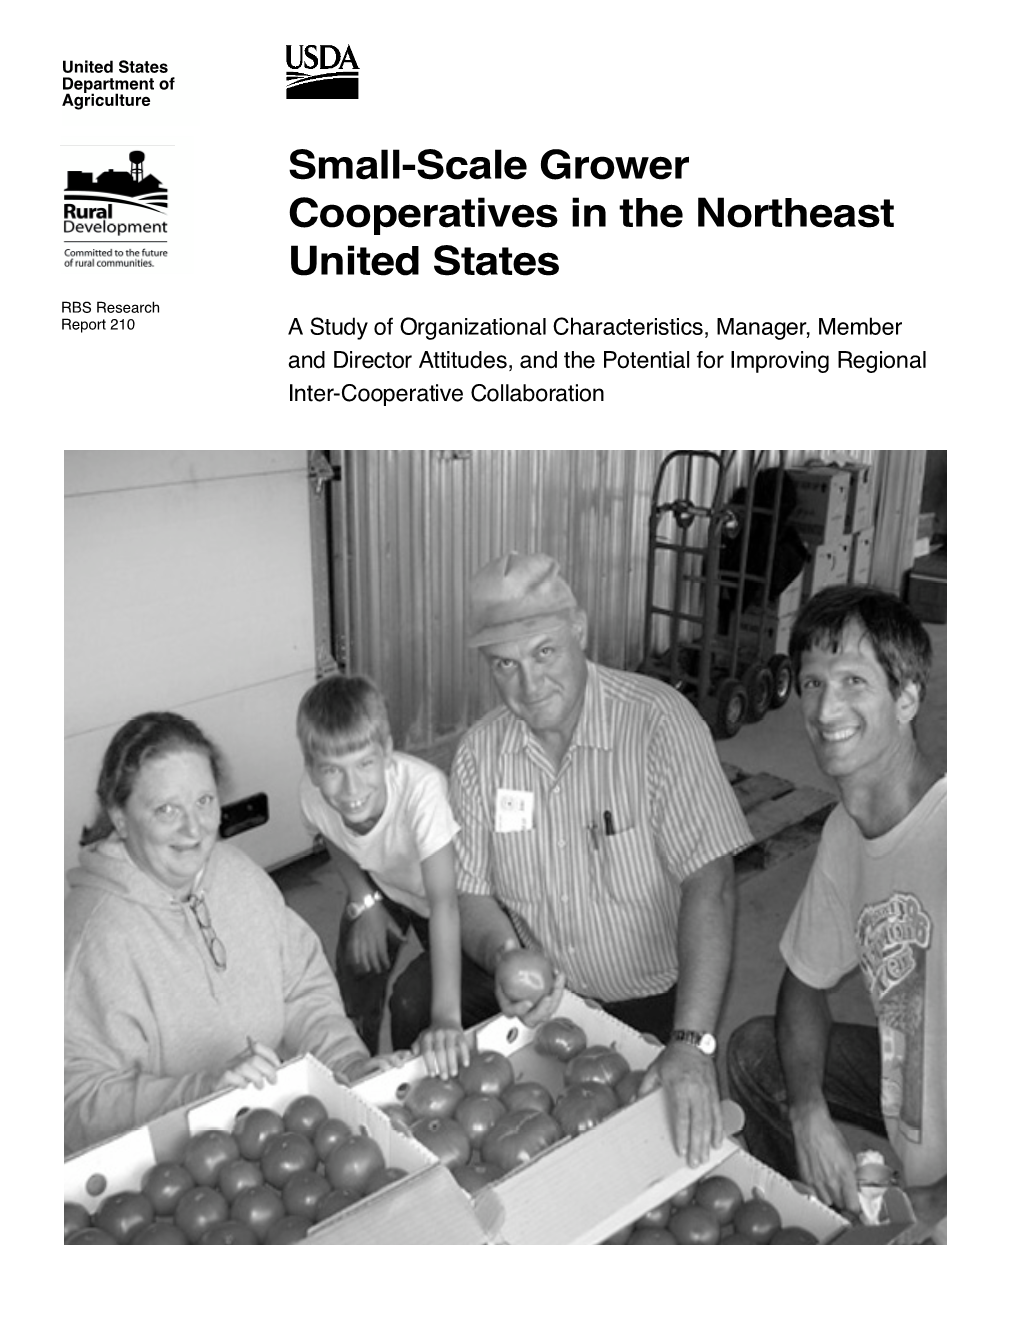 Small-Scale Grower Cooperatives in the Northeast United States